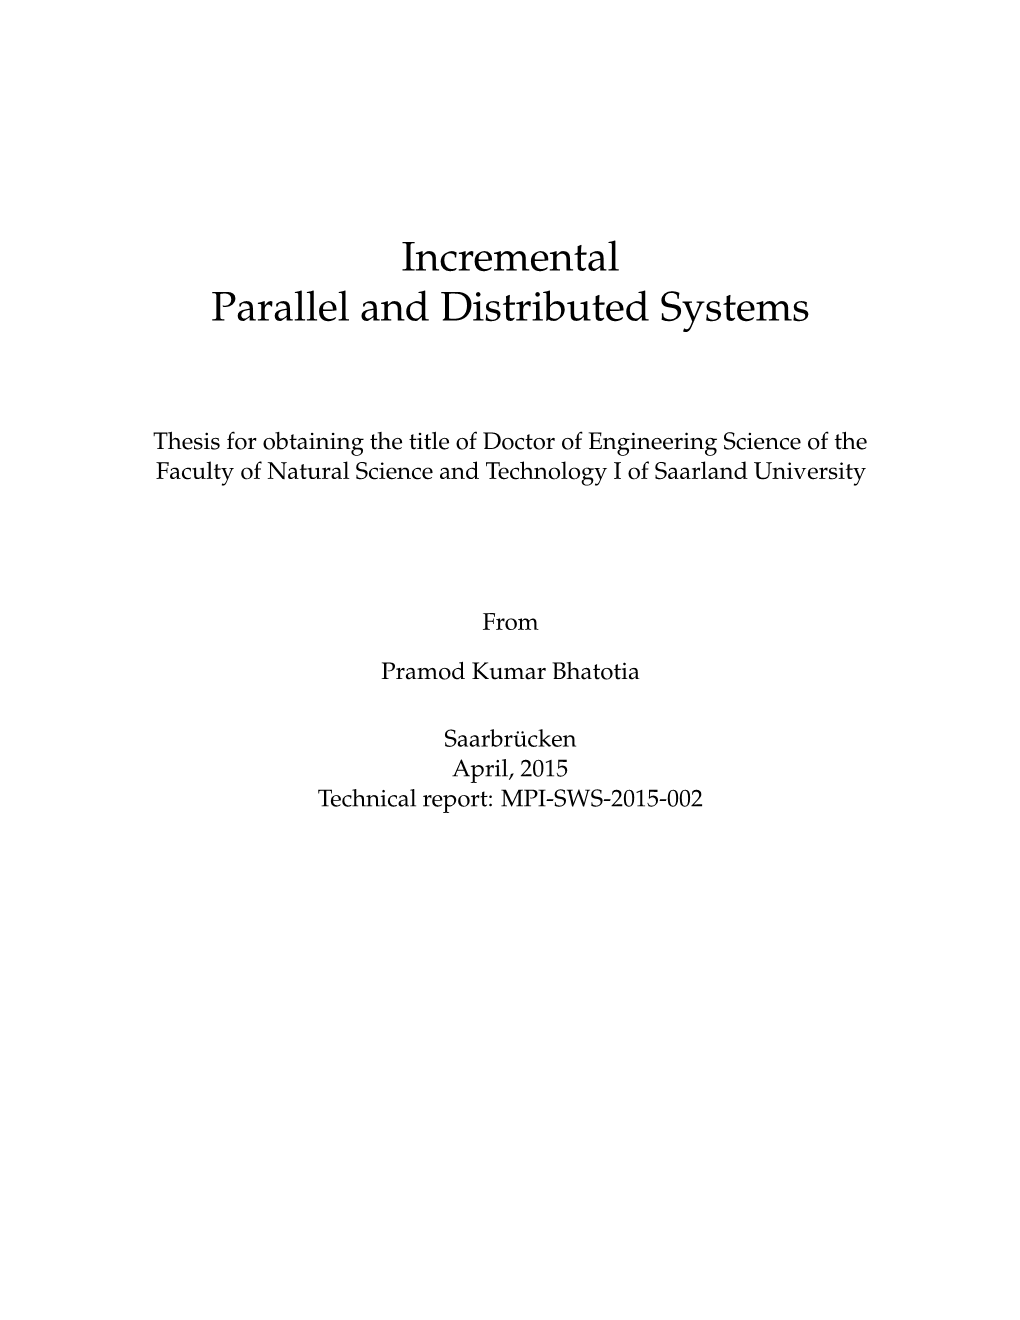 Incremental Parallel and Distributed Systems